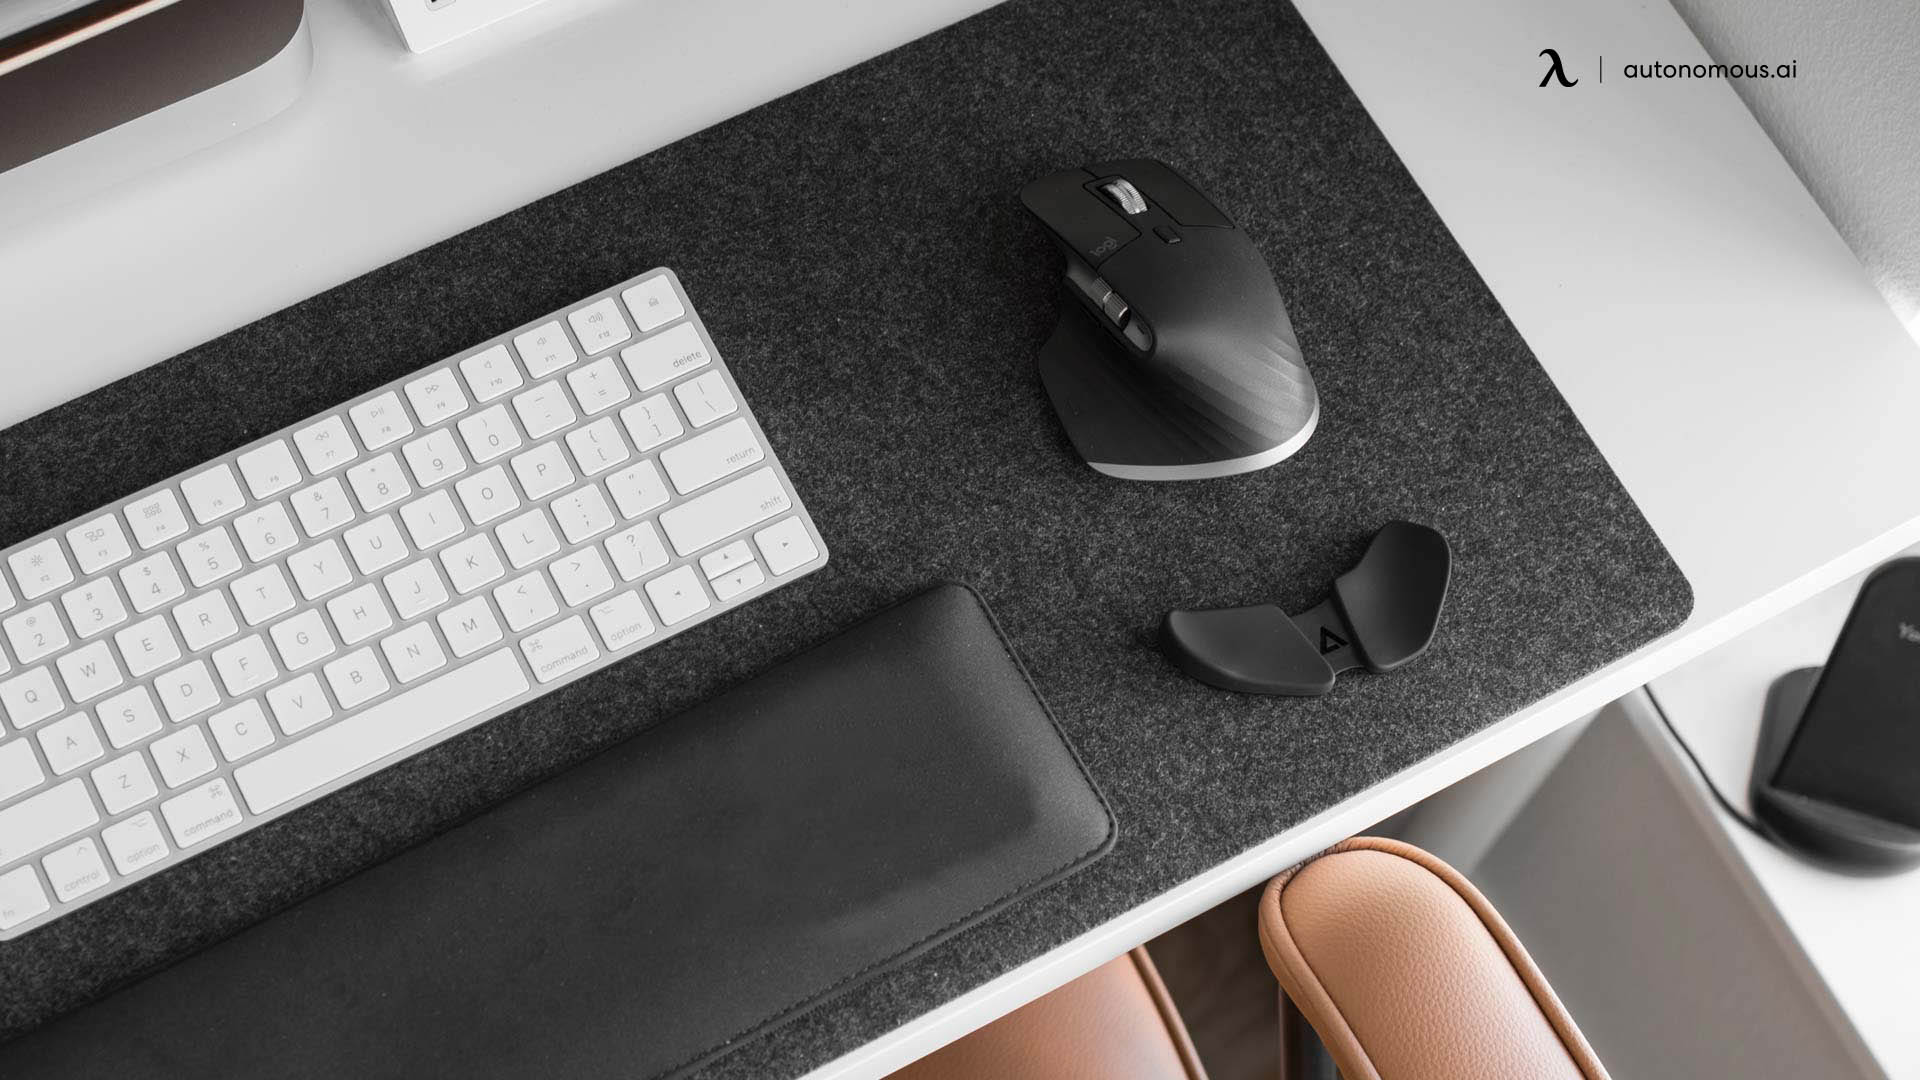 What are the Benefits of Using a Wrist Rest?